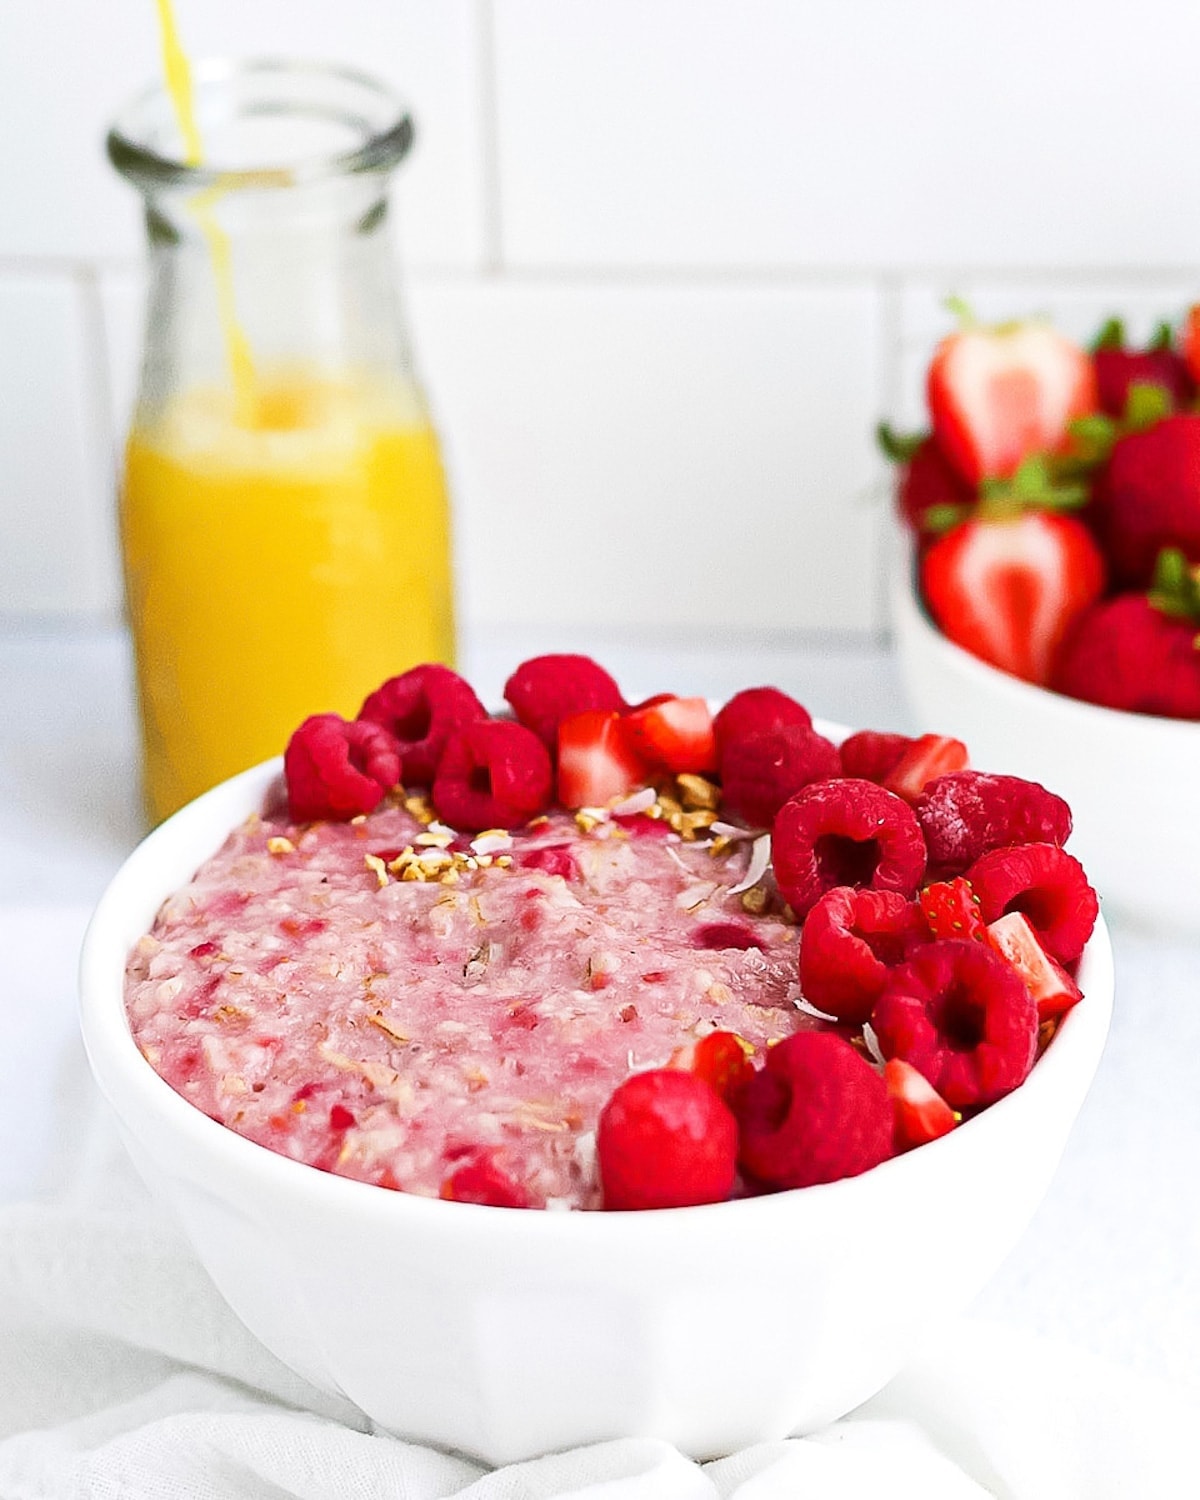 A completed picture of raspberry oatmeal garnish with fruit and granola, orange juice being poured in the background and a bowl of strawberries in the background.